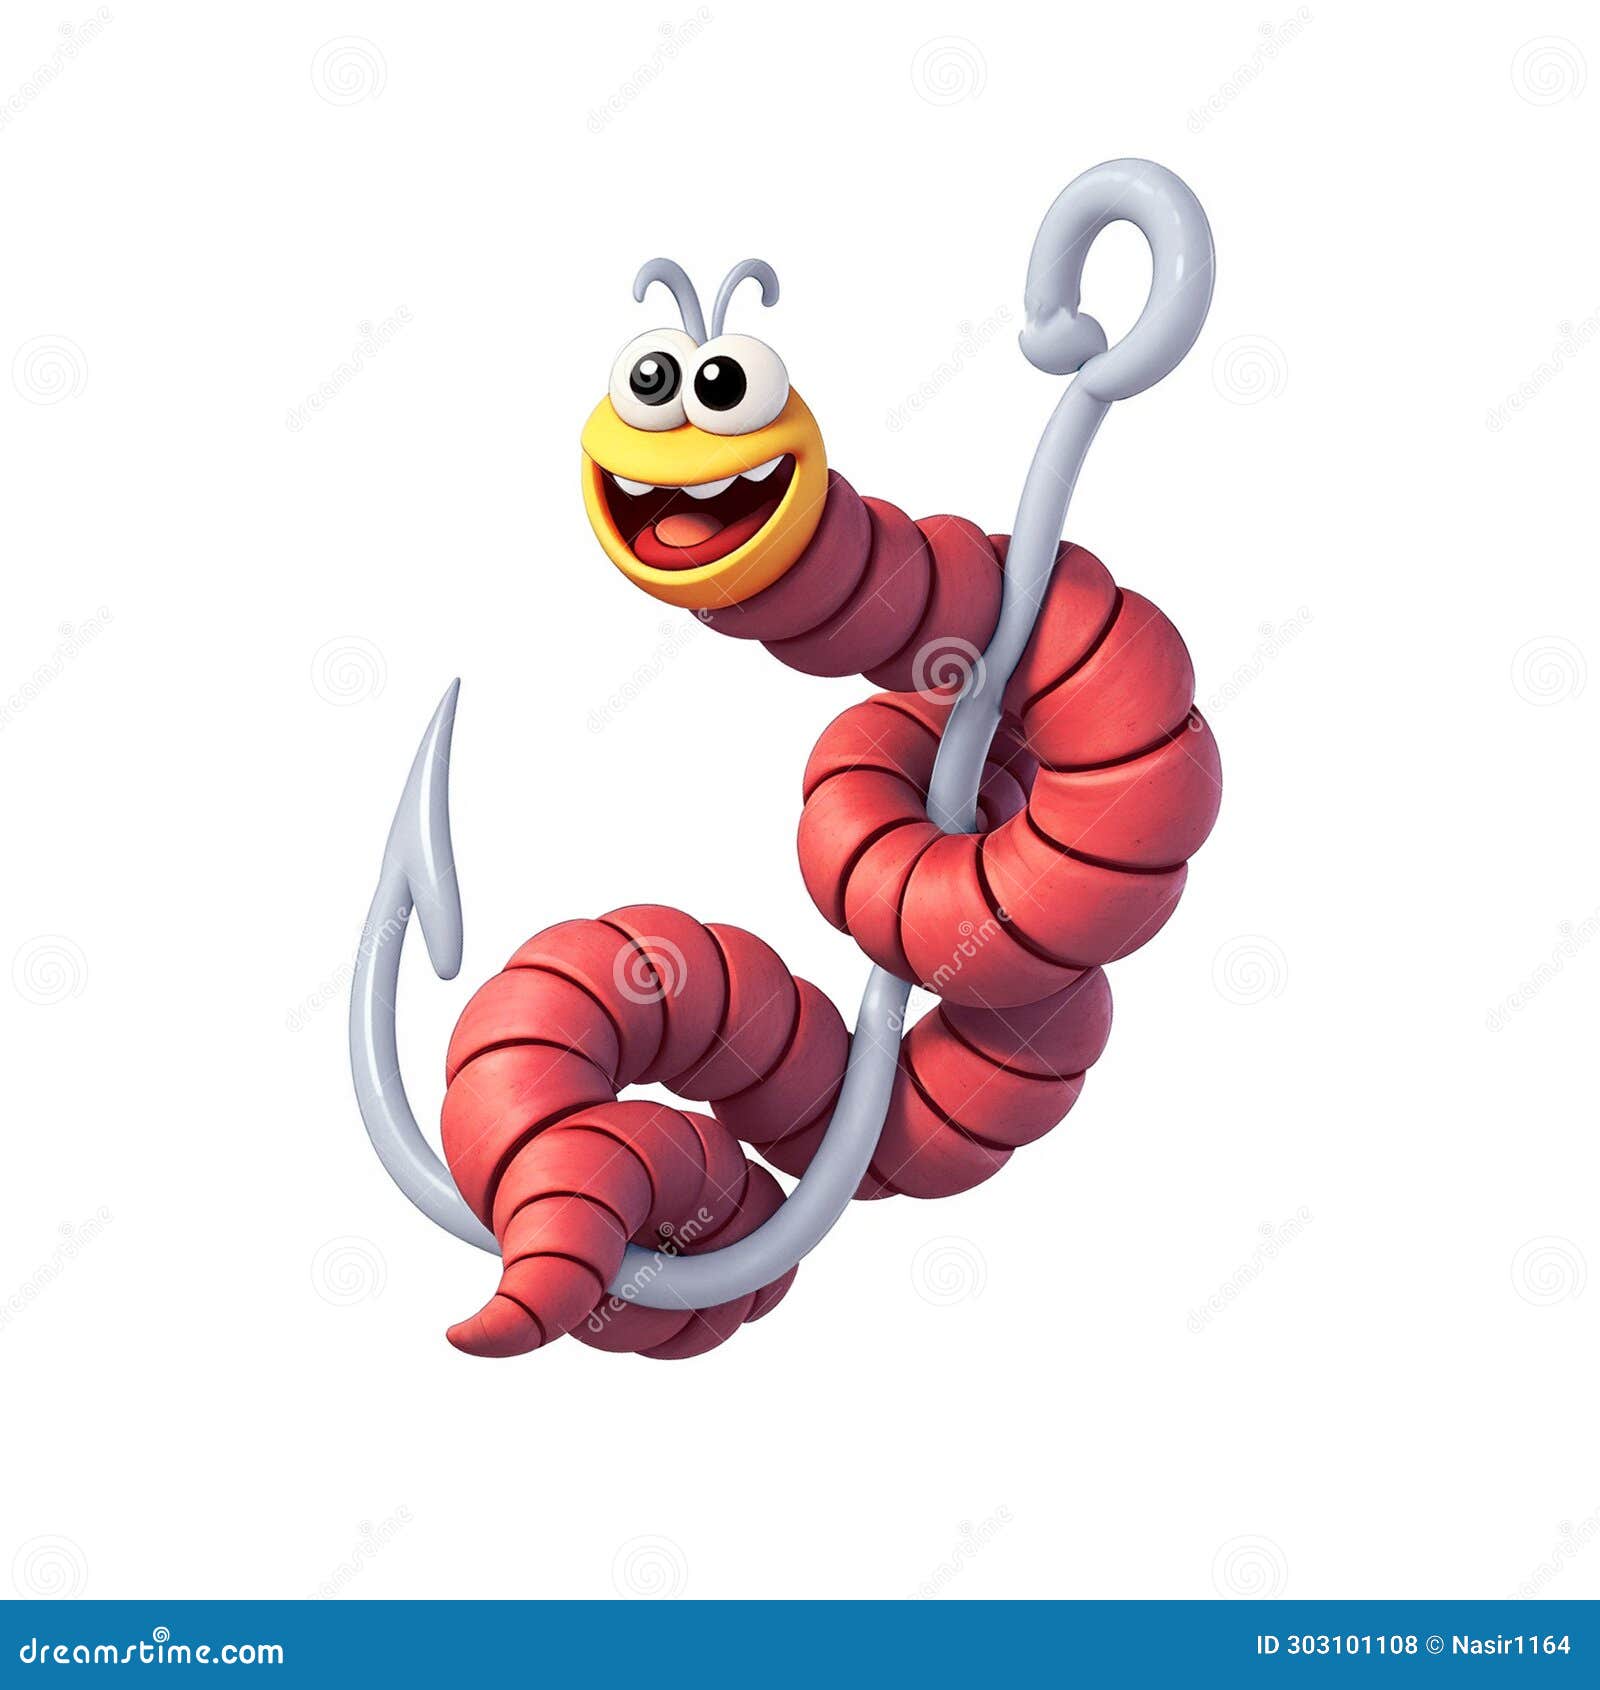 A 3d Cartoon Character Worm on the Fishing Hook for Fish Trapping White  Background, Looking Cute, Adorable and Joyful Stock Illustration -  Illustration of adorable, pursuit: 303101108